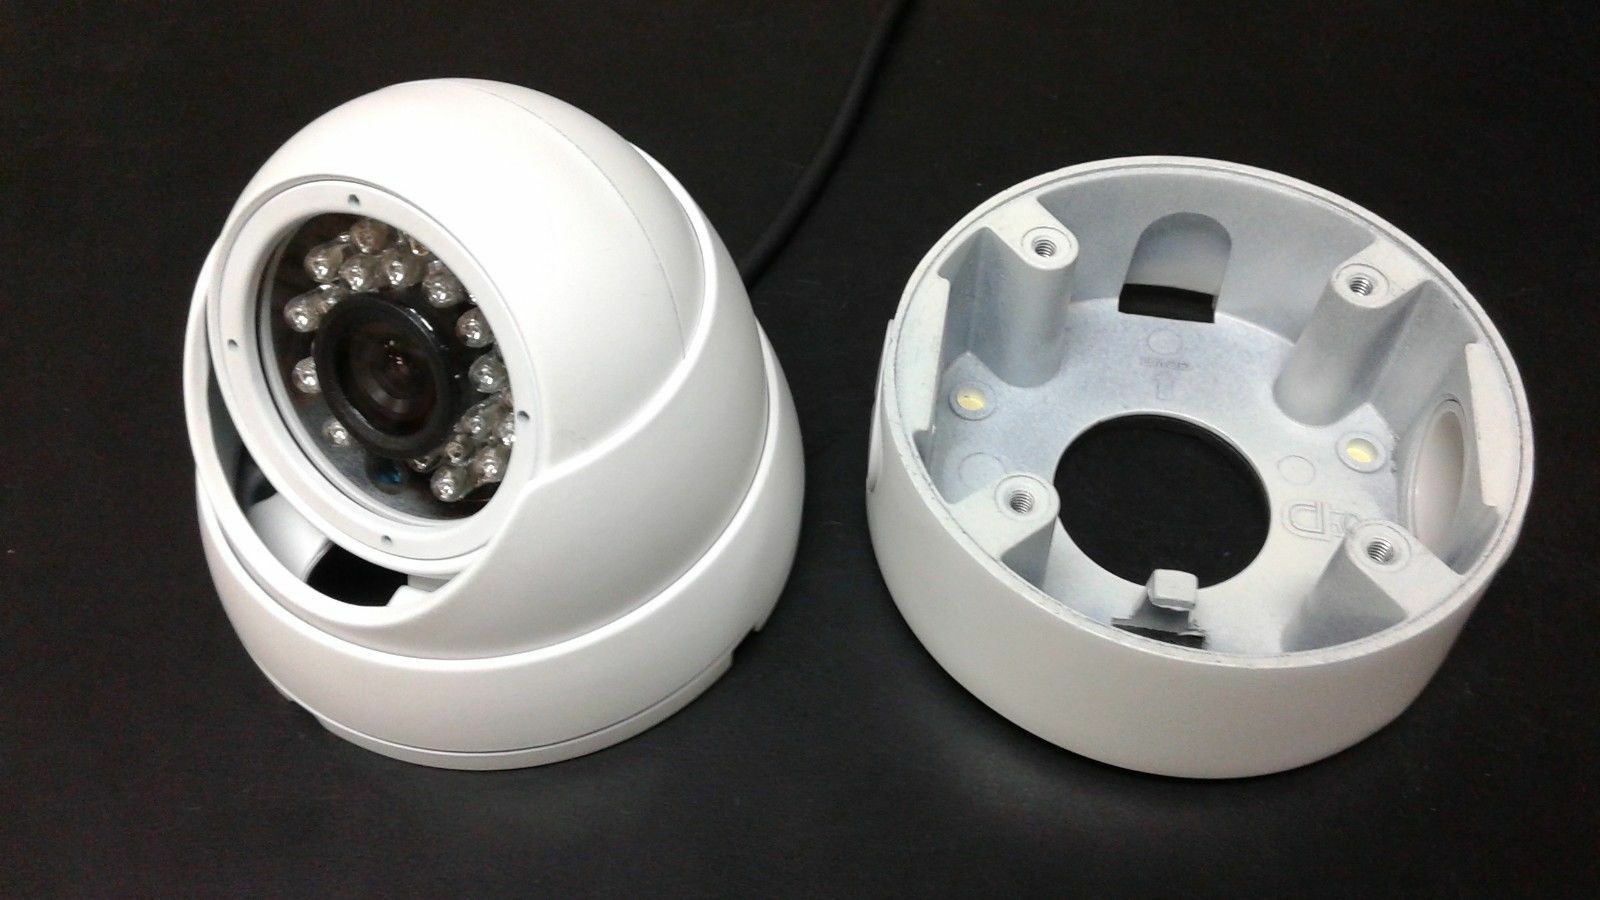 Cctv  Camera Mount Junction Box For Small Dome Cameras Connector Housing